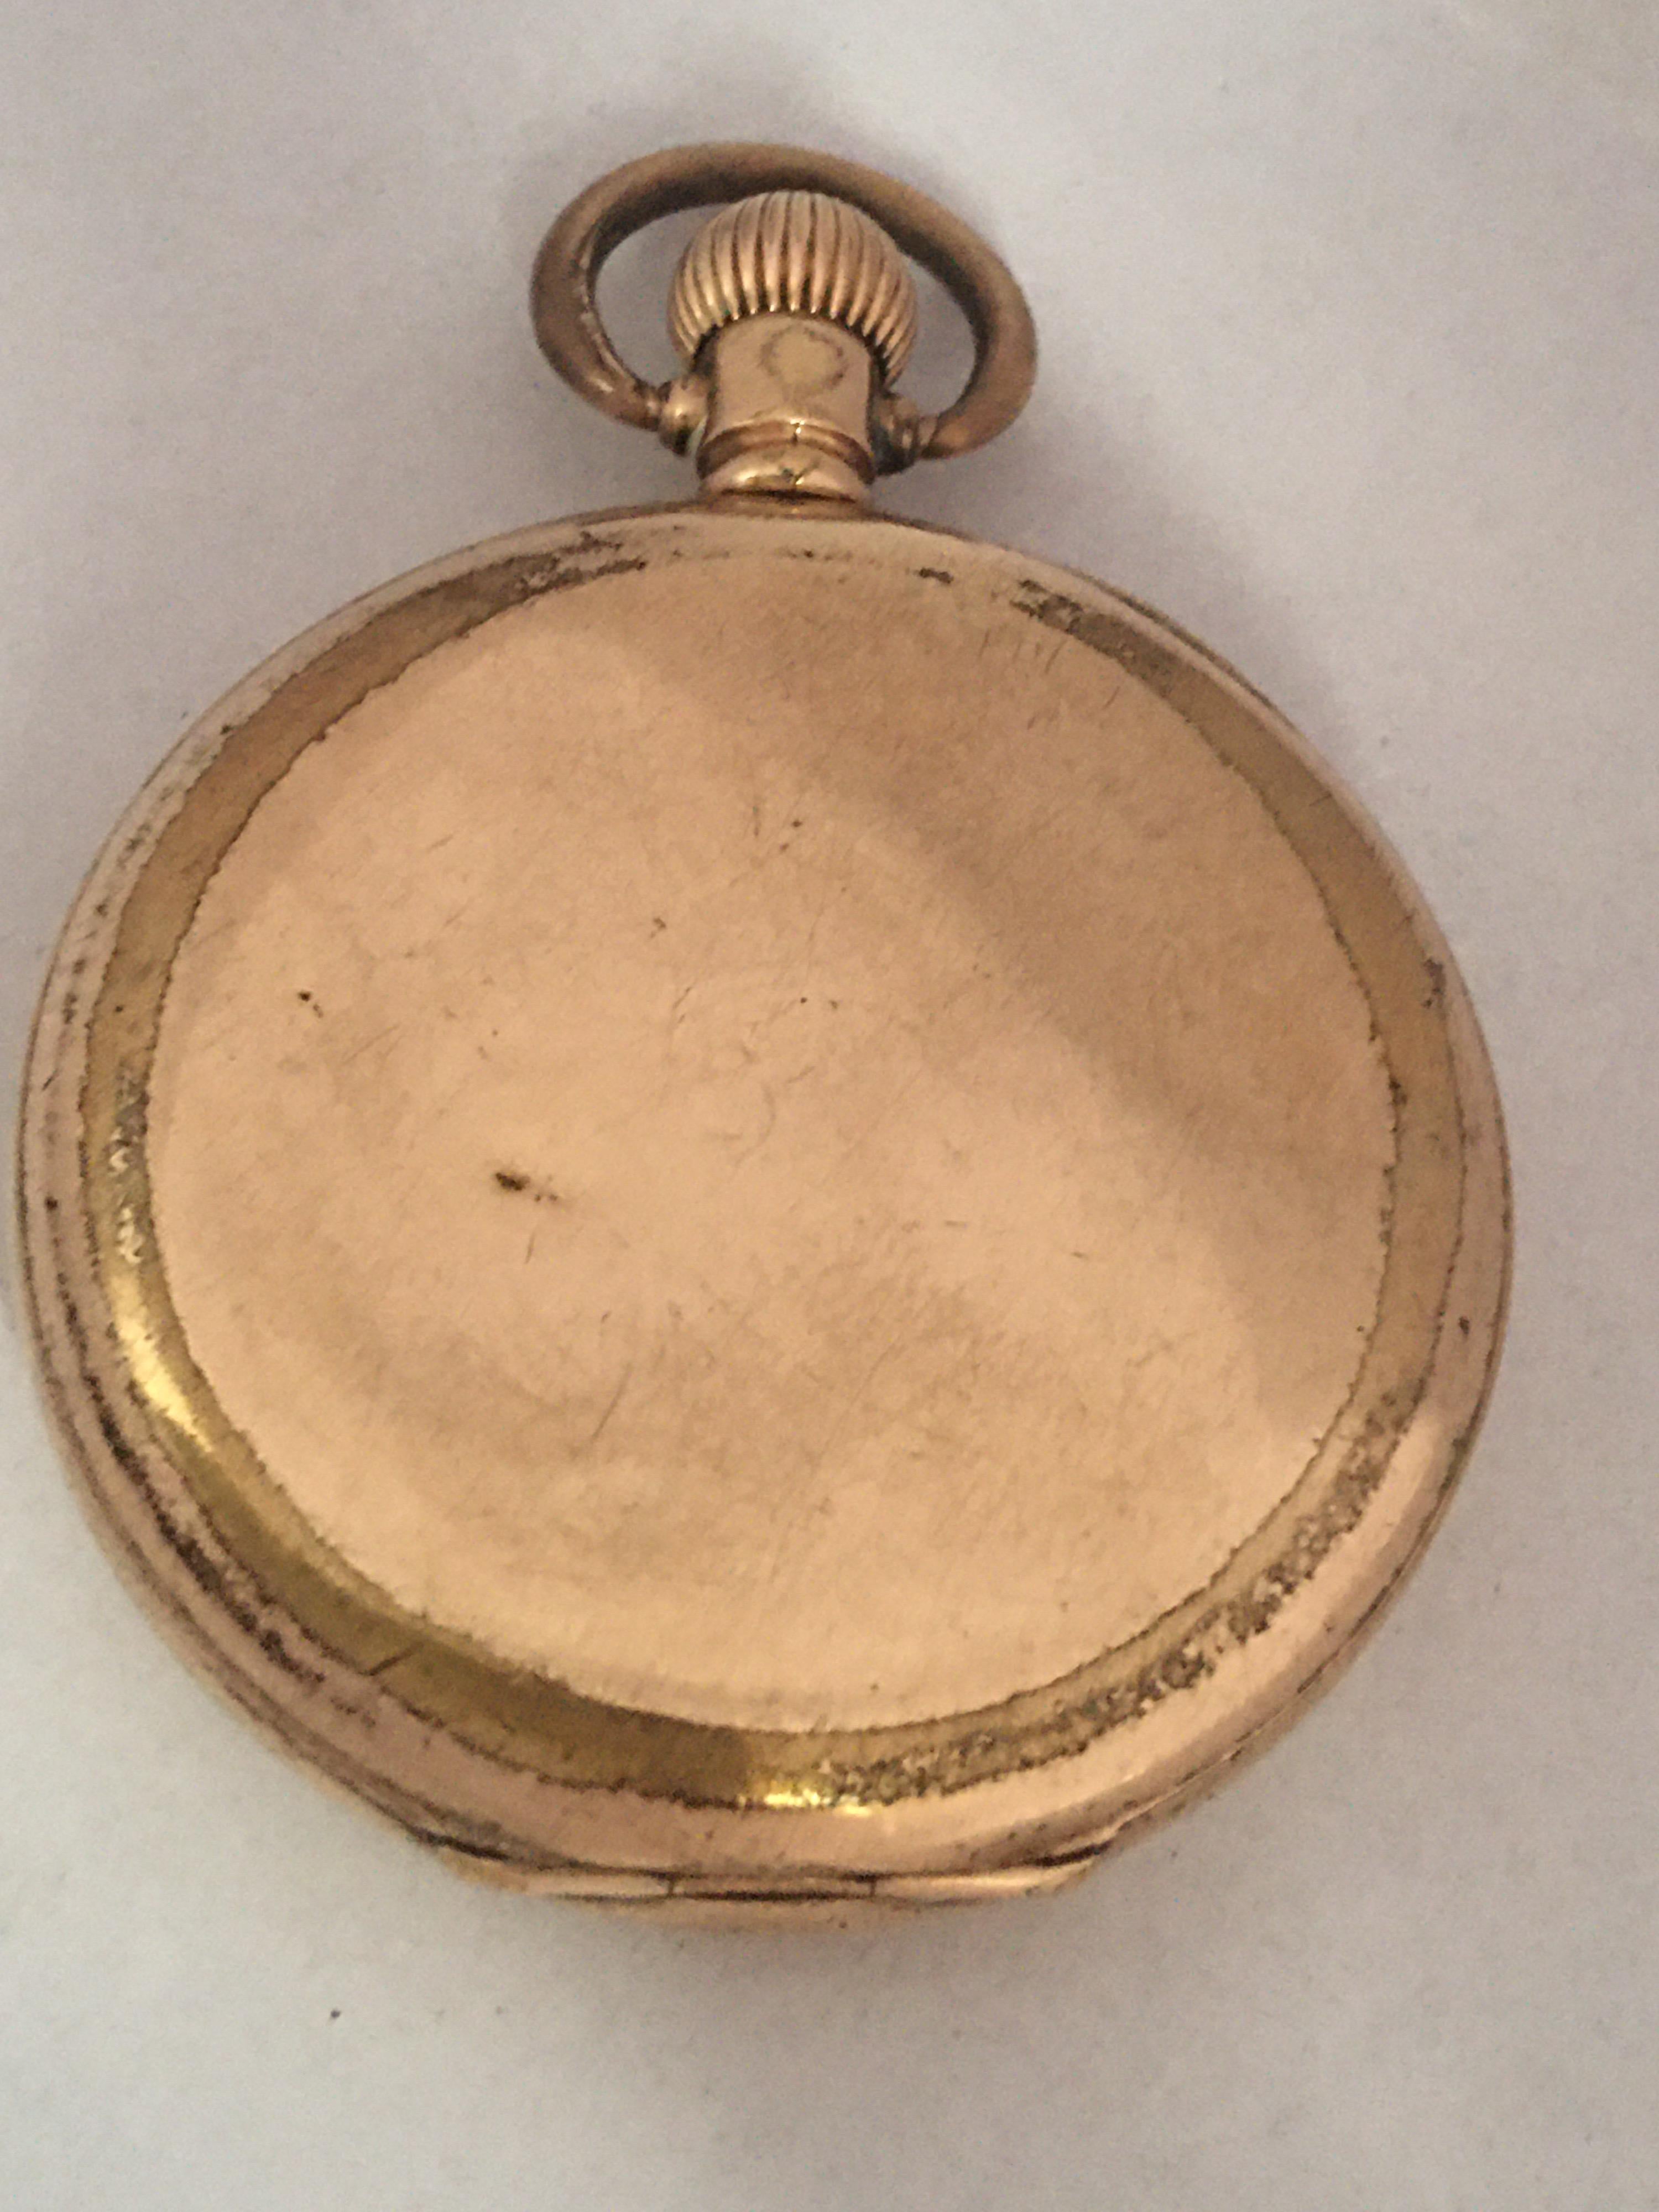 This beautiful antique 50mm diameter (excluding crown) Hand winding pocket watch is in good working condition and it is ticking well. Visible signs of ageing and wear with light marks on the glass and on the watch case as shown. Some dotted